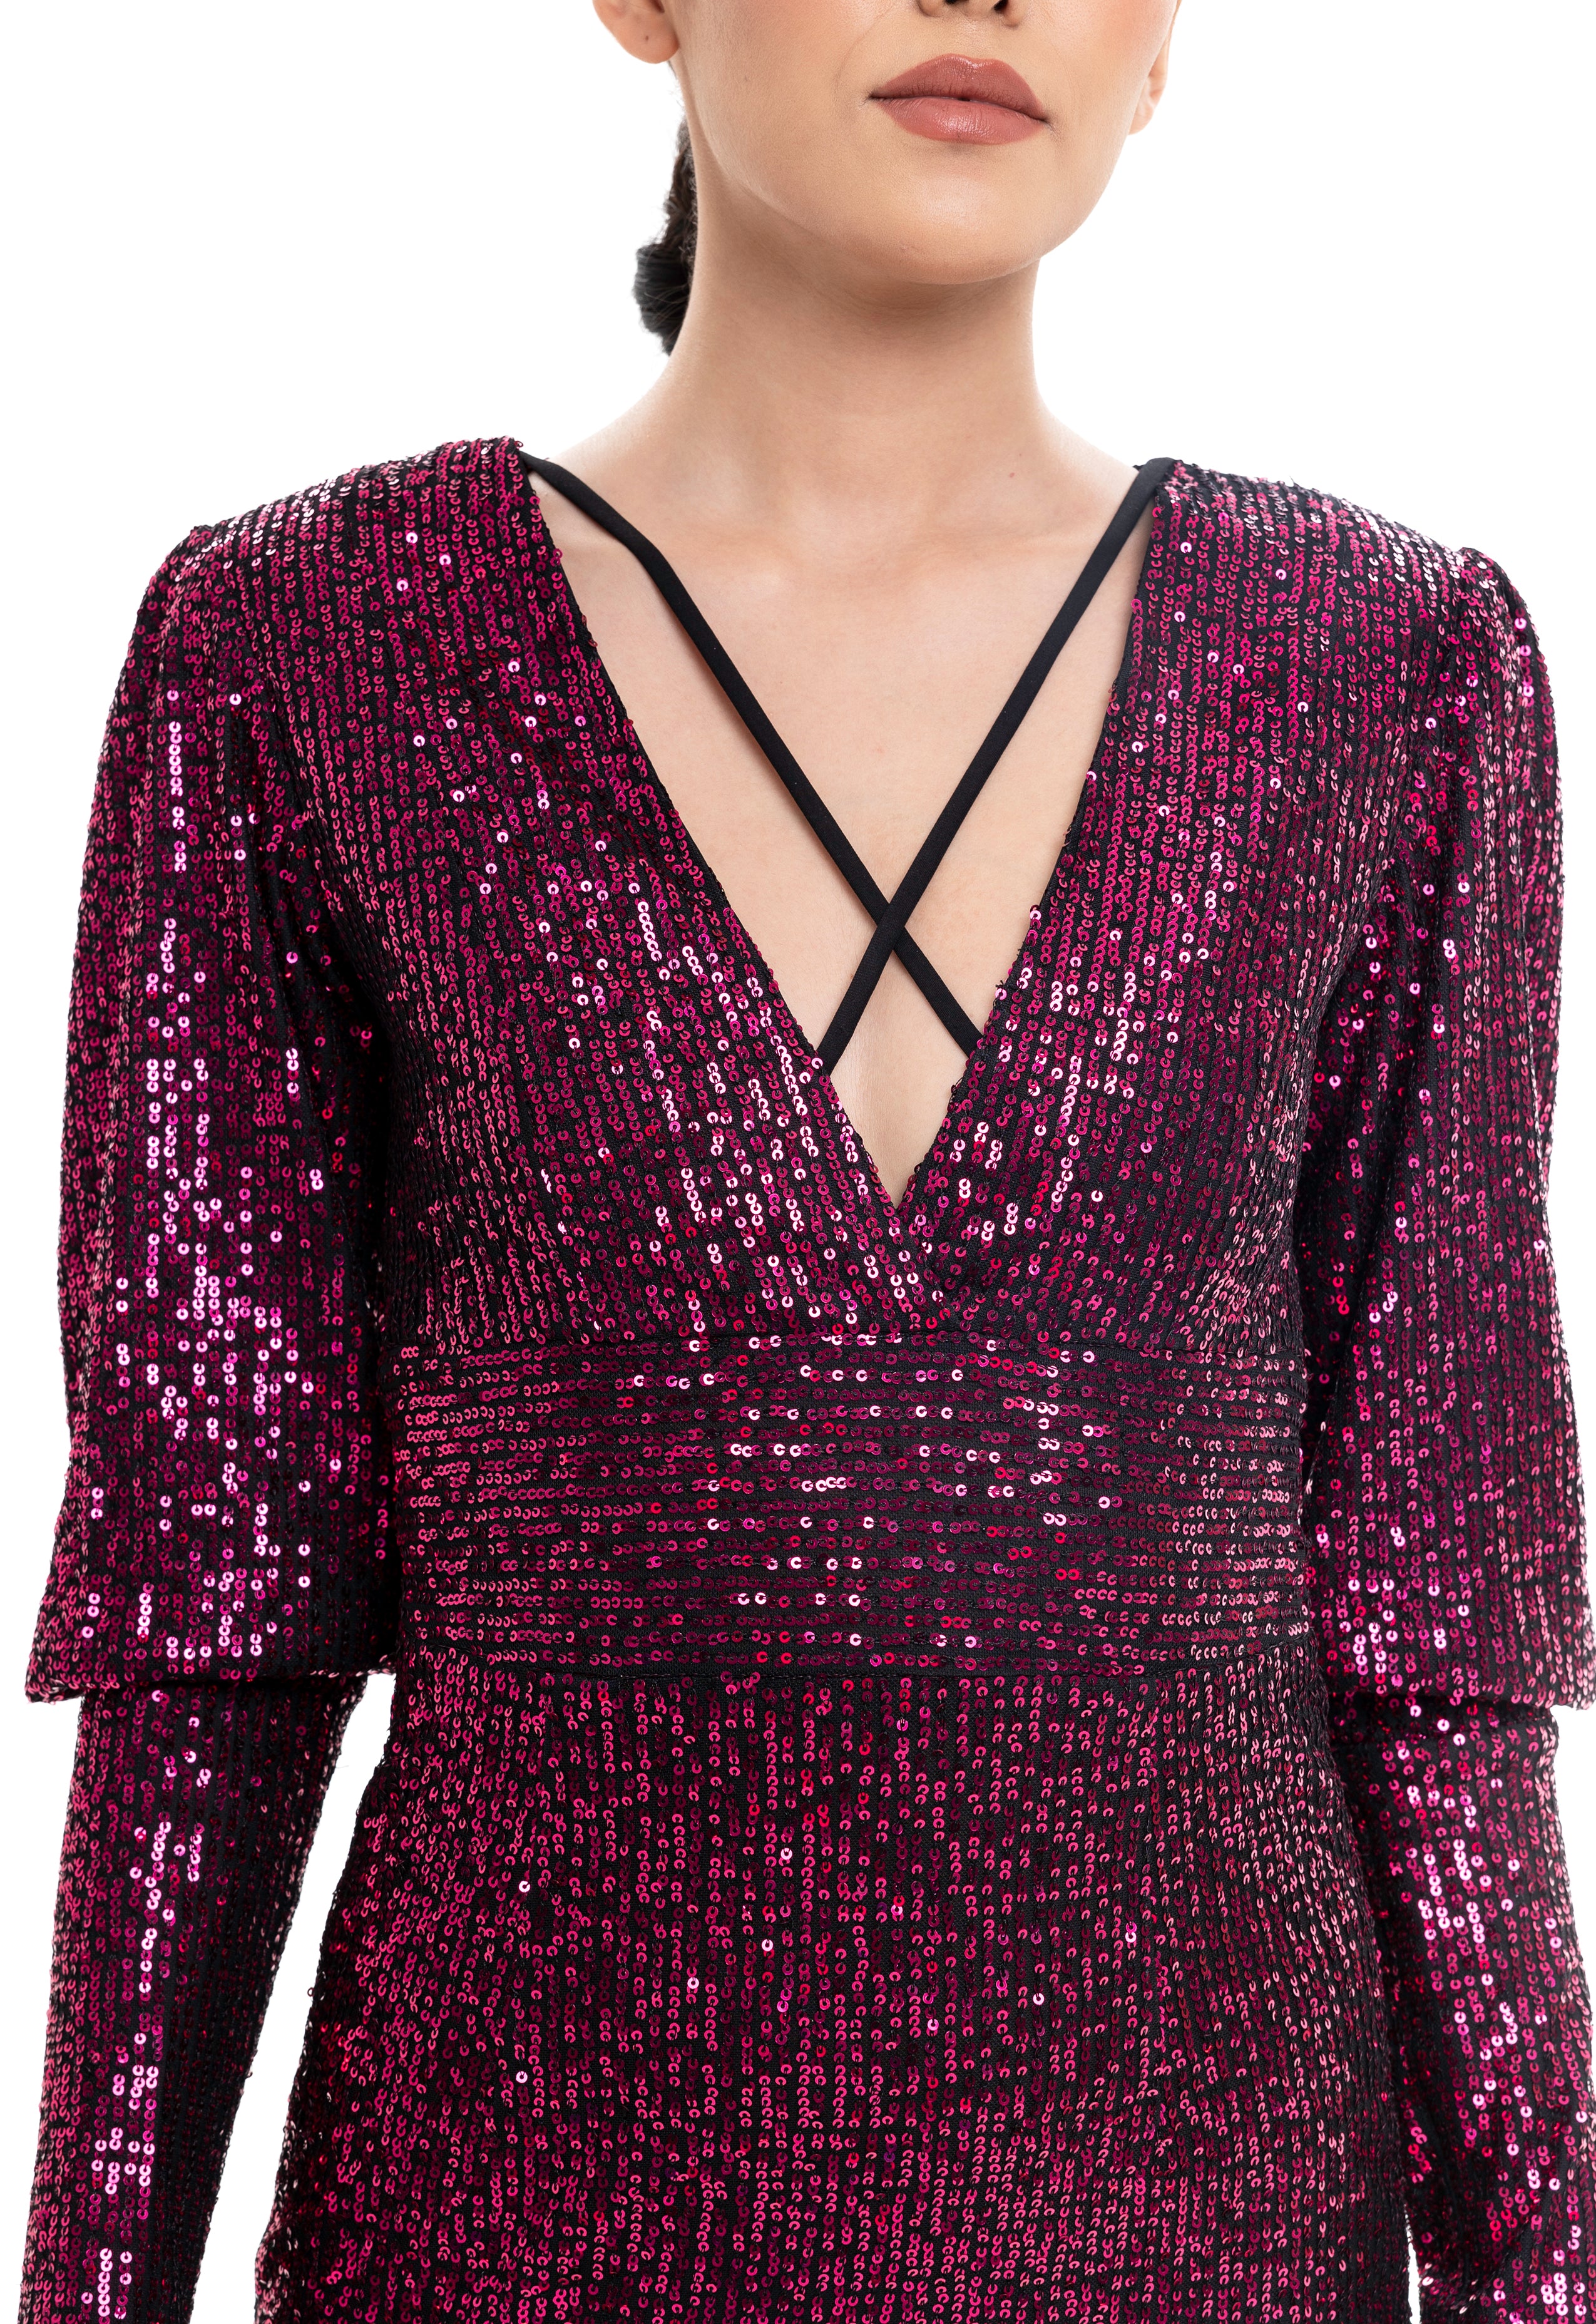 The Glam Short Sequin Dress By Lili Blanc